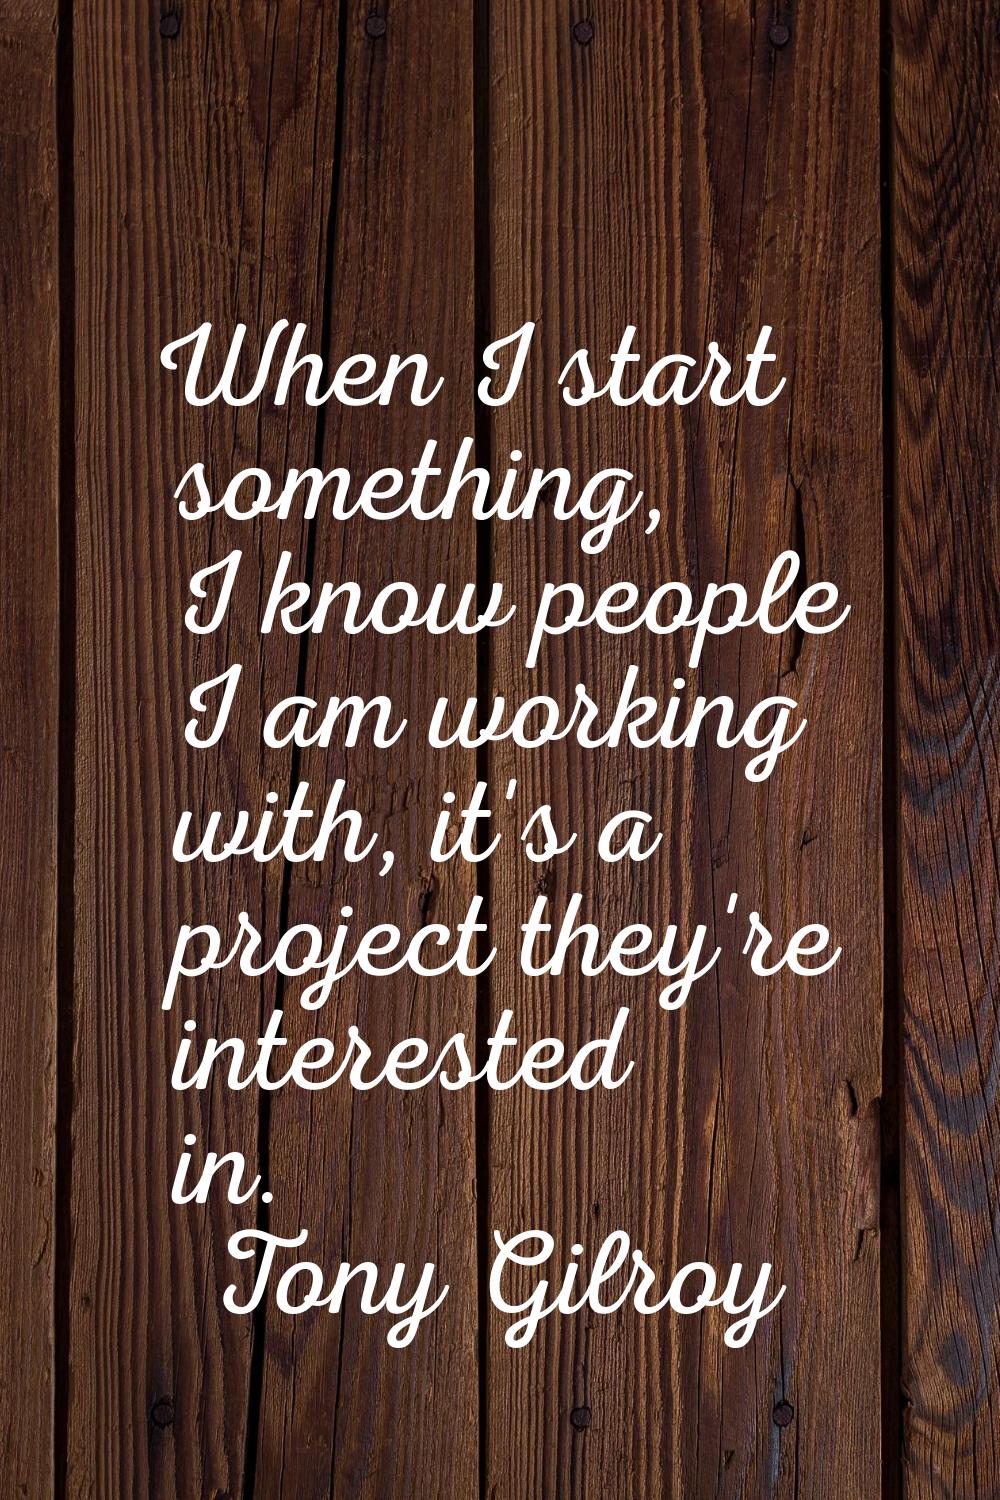 When I start something, I know people I am working with, it's a project they're interested in.